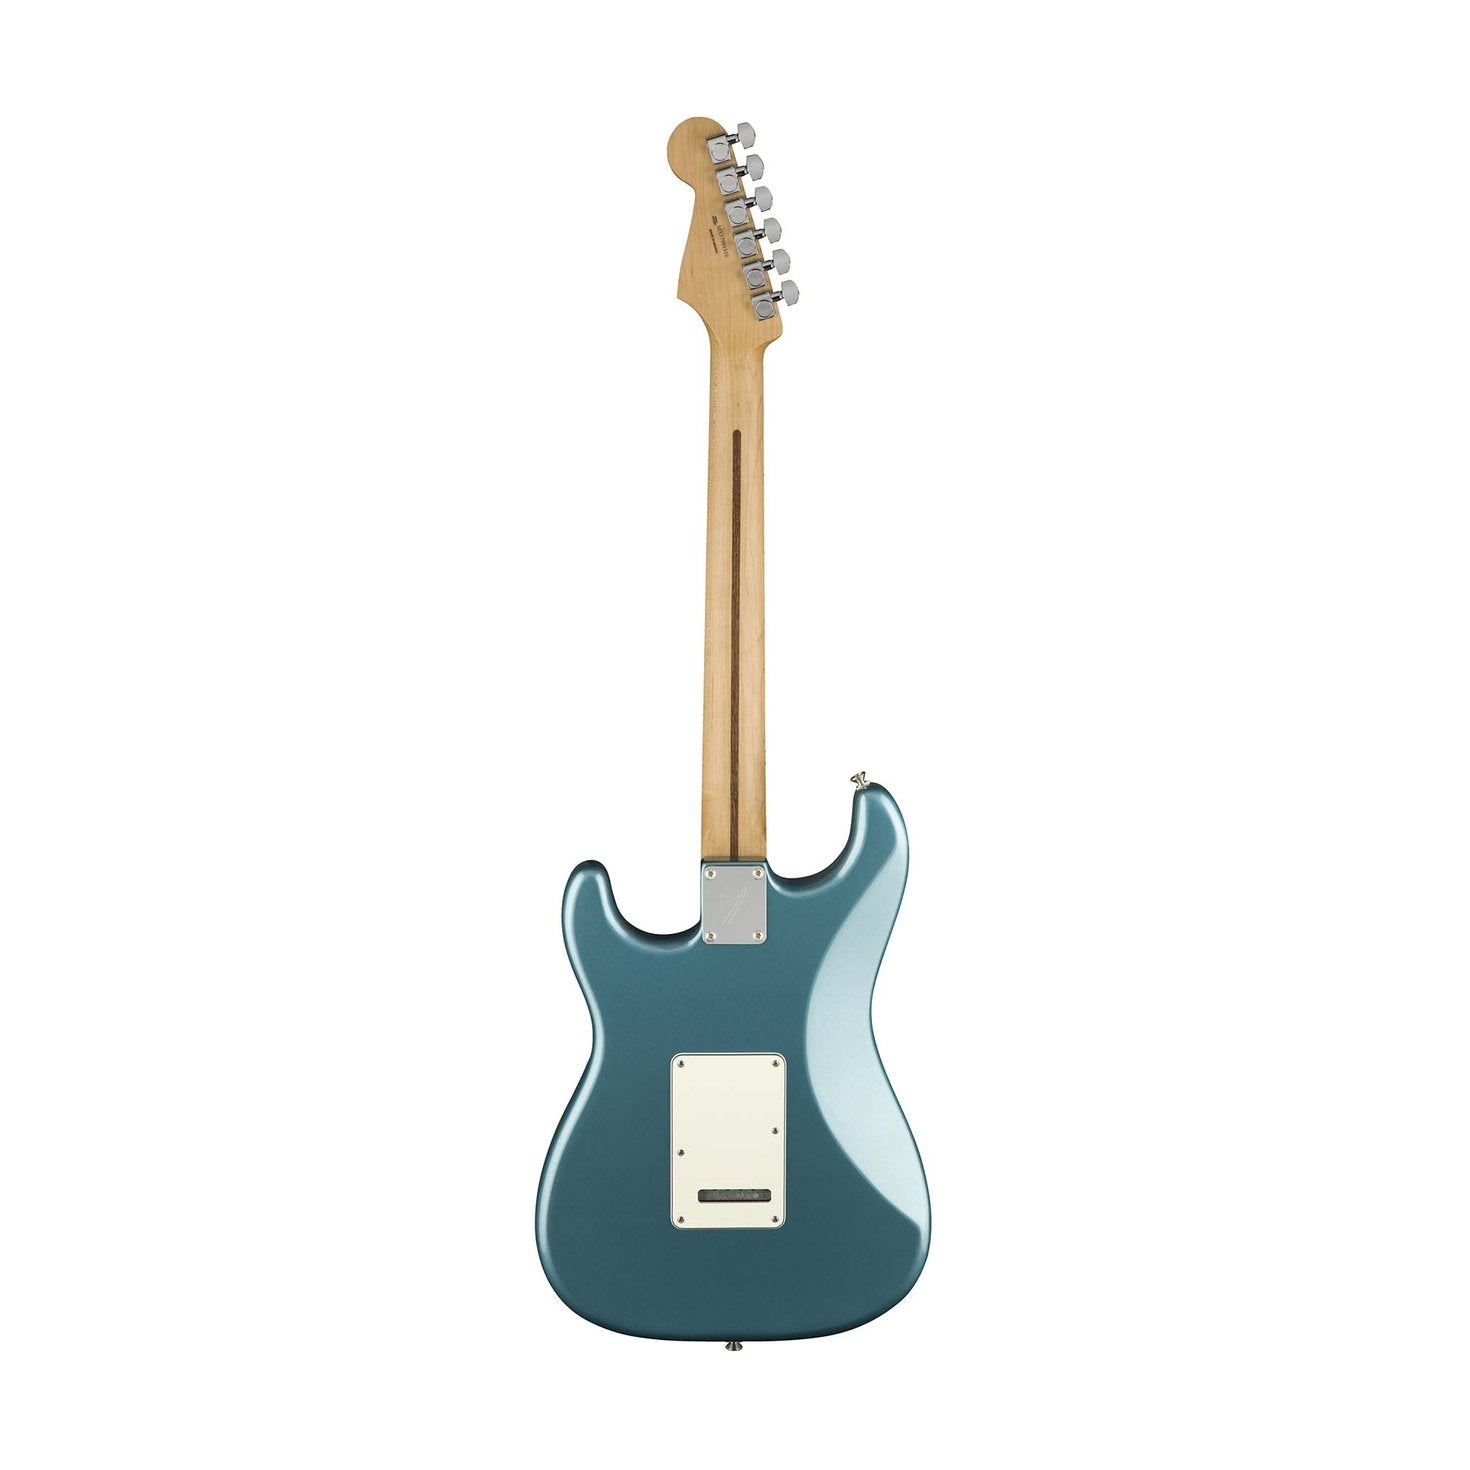 Fender Player Stratocaster Electric Guitar, Maple FB, Tidepool, FENDER, ELECTRIC GUITAR, fender-eletric-guitar-f03-014-4502-513, ZOSO MUSIC SDN BHD